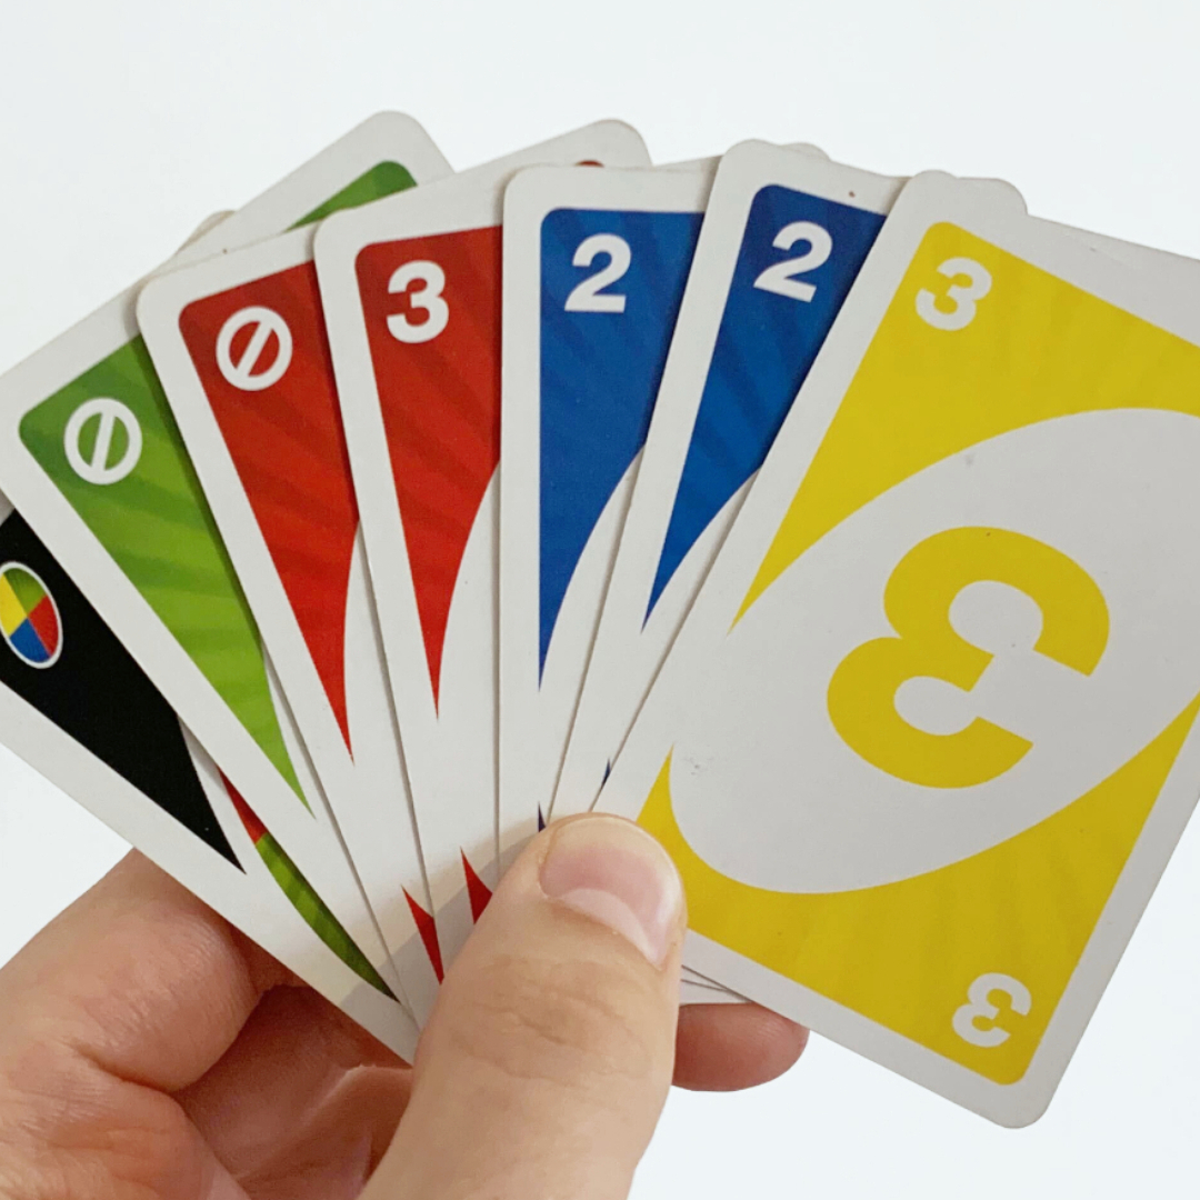 Get paid to play 'UNO